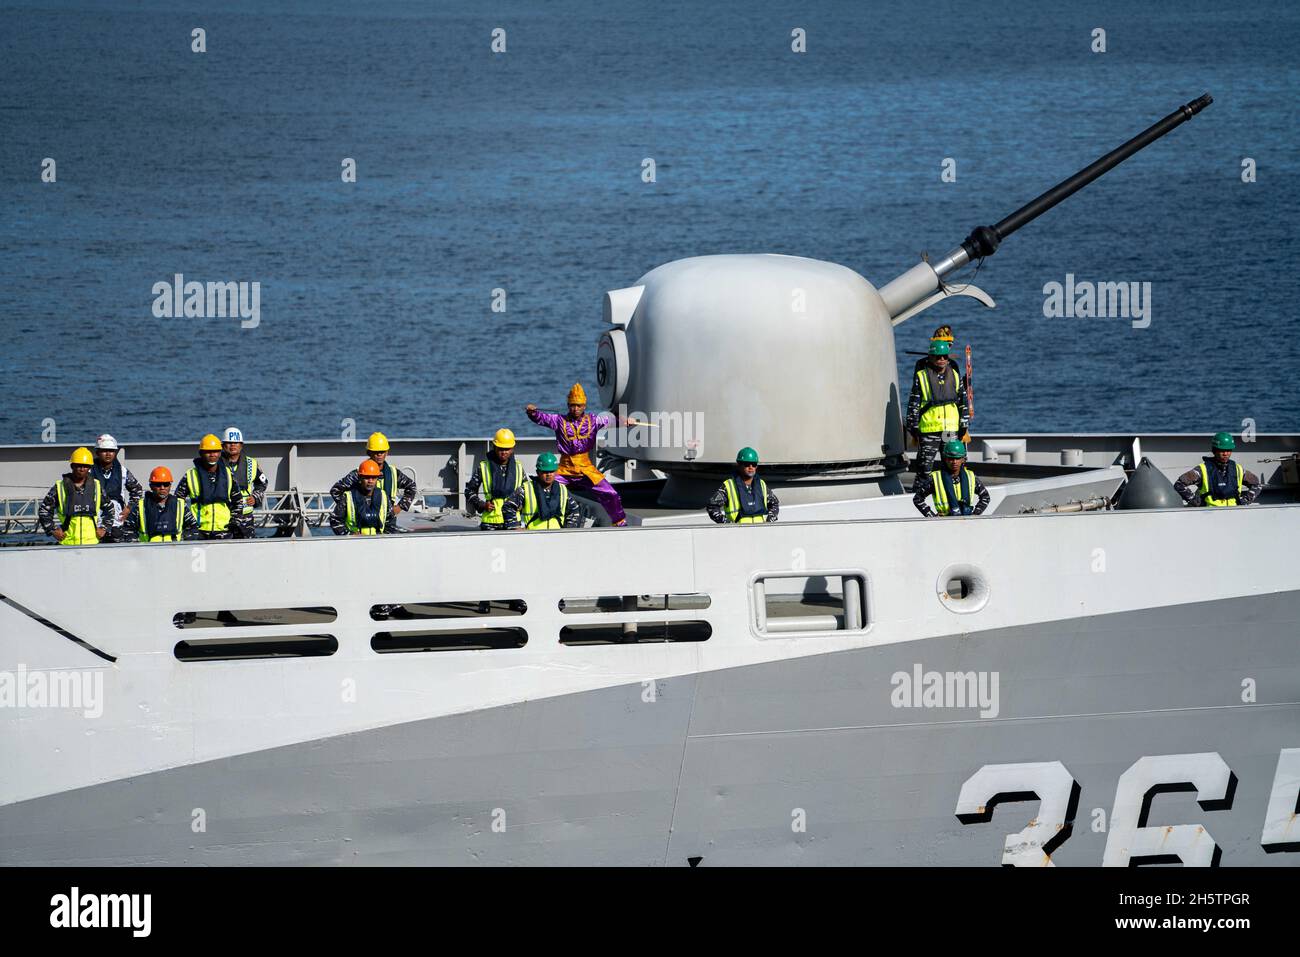 Java Sea, Indonesia. 09 November, 2021. The Indonesian Navy Diponegoro-class corvette KRI Diponegoro sails alongside the Independence-variant littoral combat ship USS Jackson during Cooperation Afloat and Readiness and Training November 9, 2021in the Java Sea.  Credit: MC3 Andrew Langholf/Planetpix/Alamy Live News Stock Photo